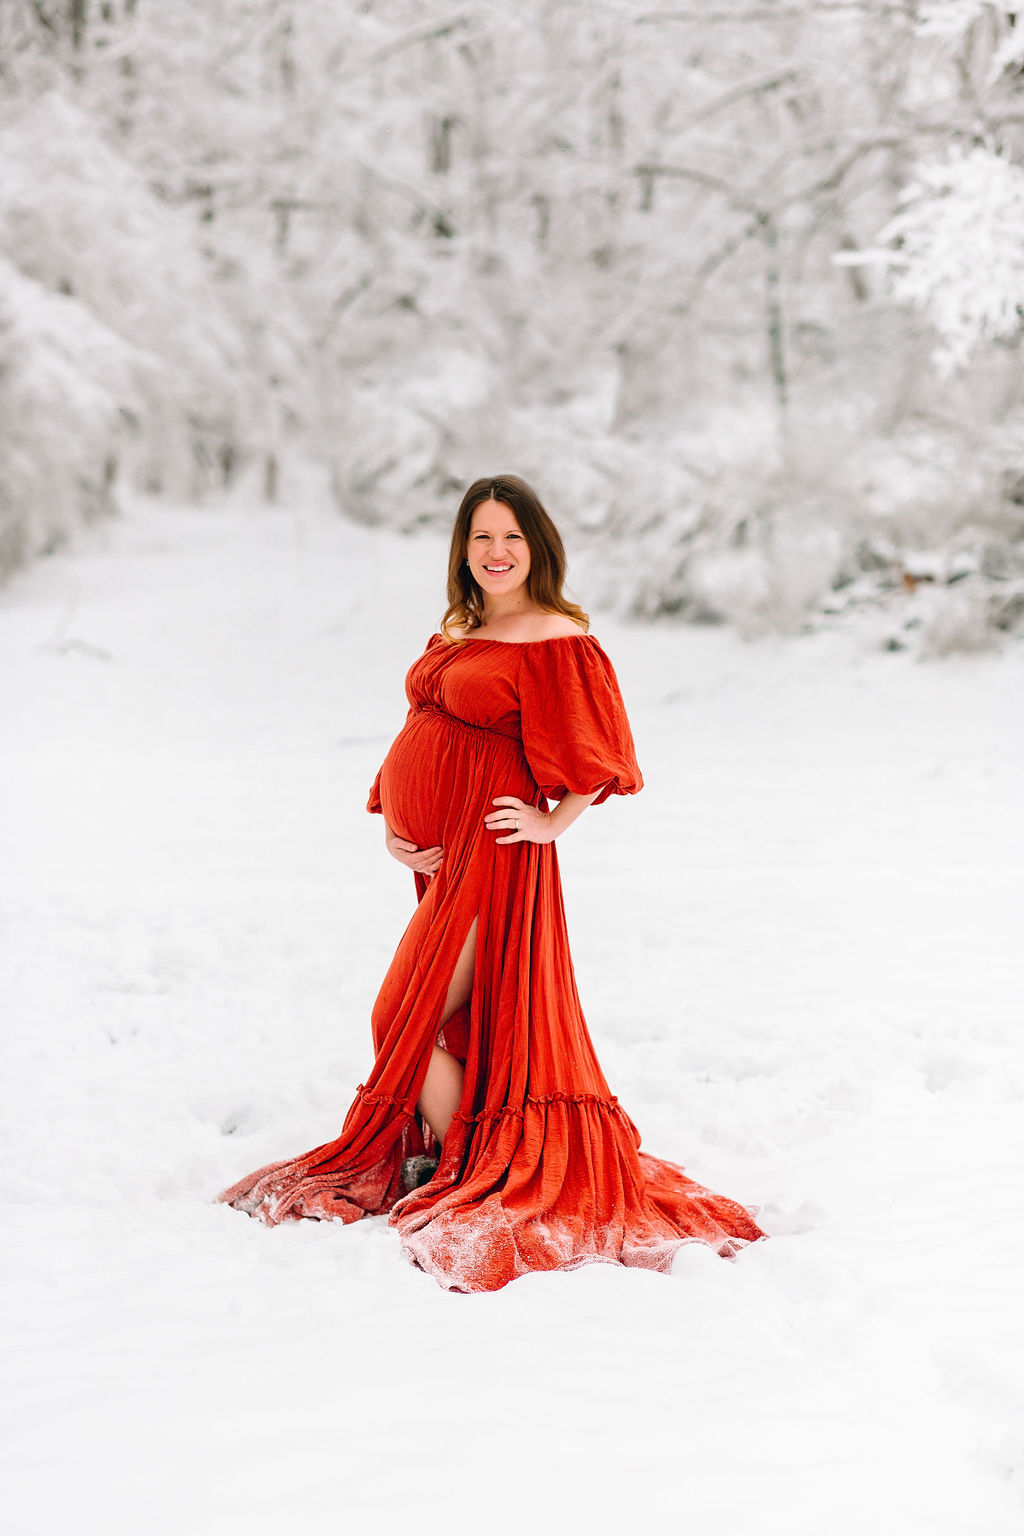 Mother to be wearing a long red maternity gown stands in a snowy forest uva midwives